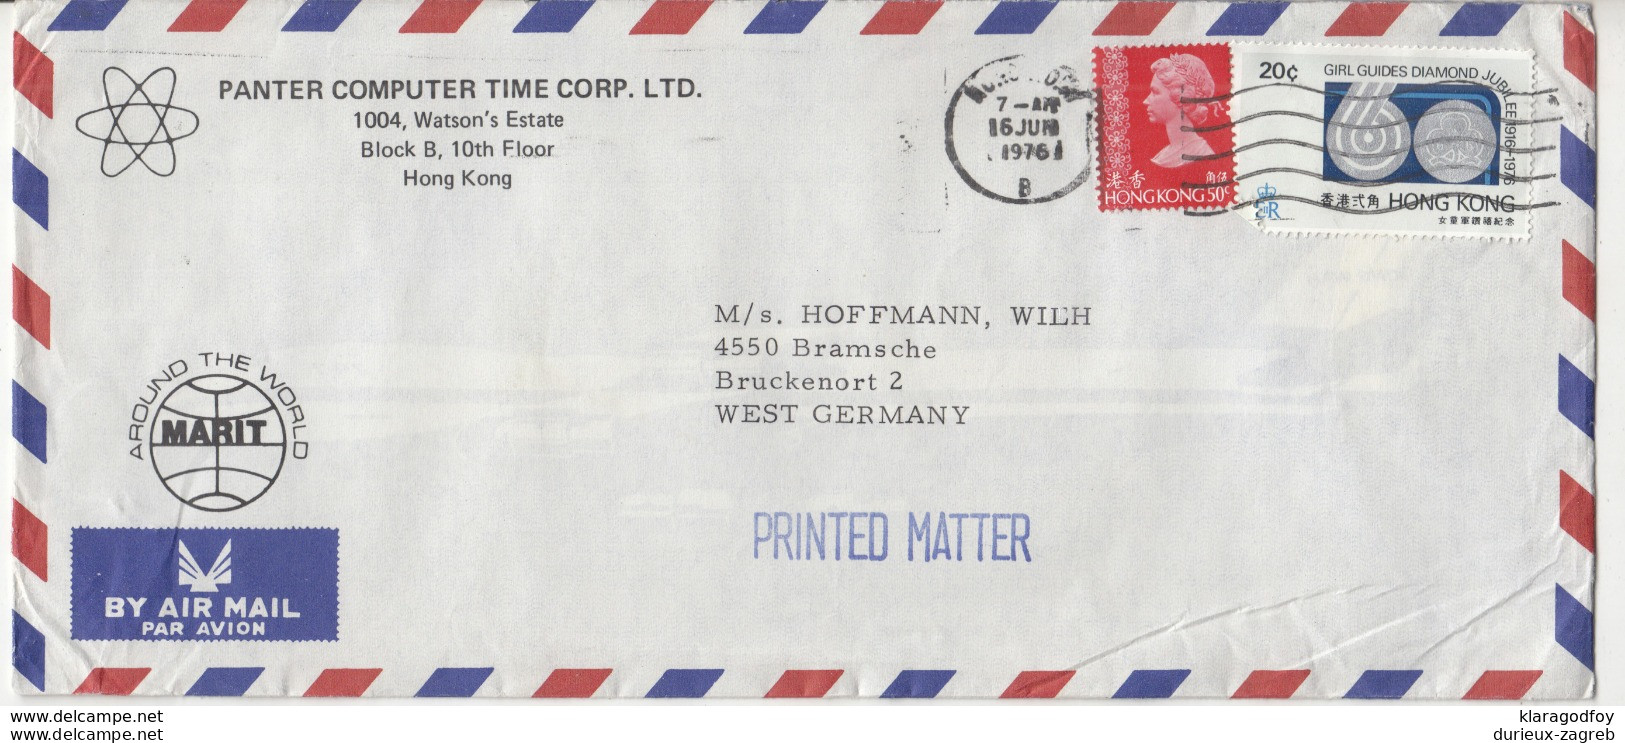 Panter Computer Time Corp. Company Air Mail Letter Cover Travelled 1976 To Germany B190922 - Lettres & Documents